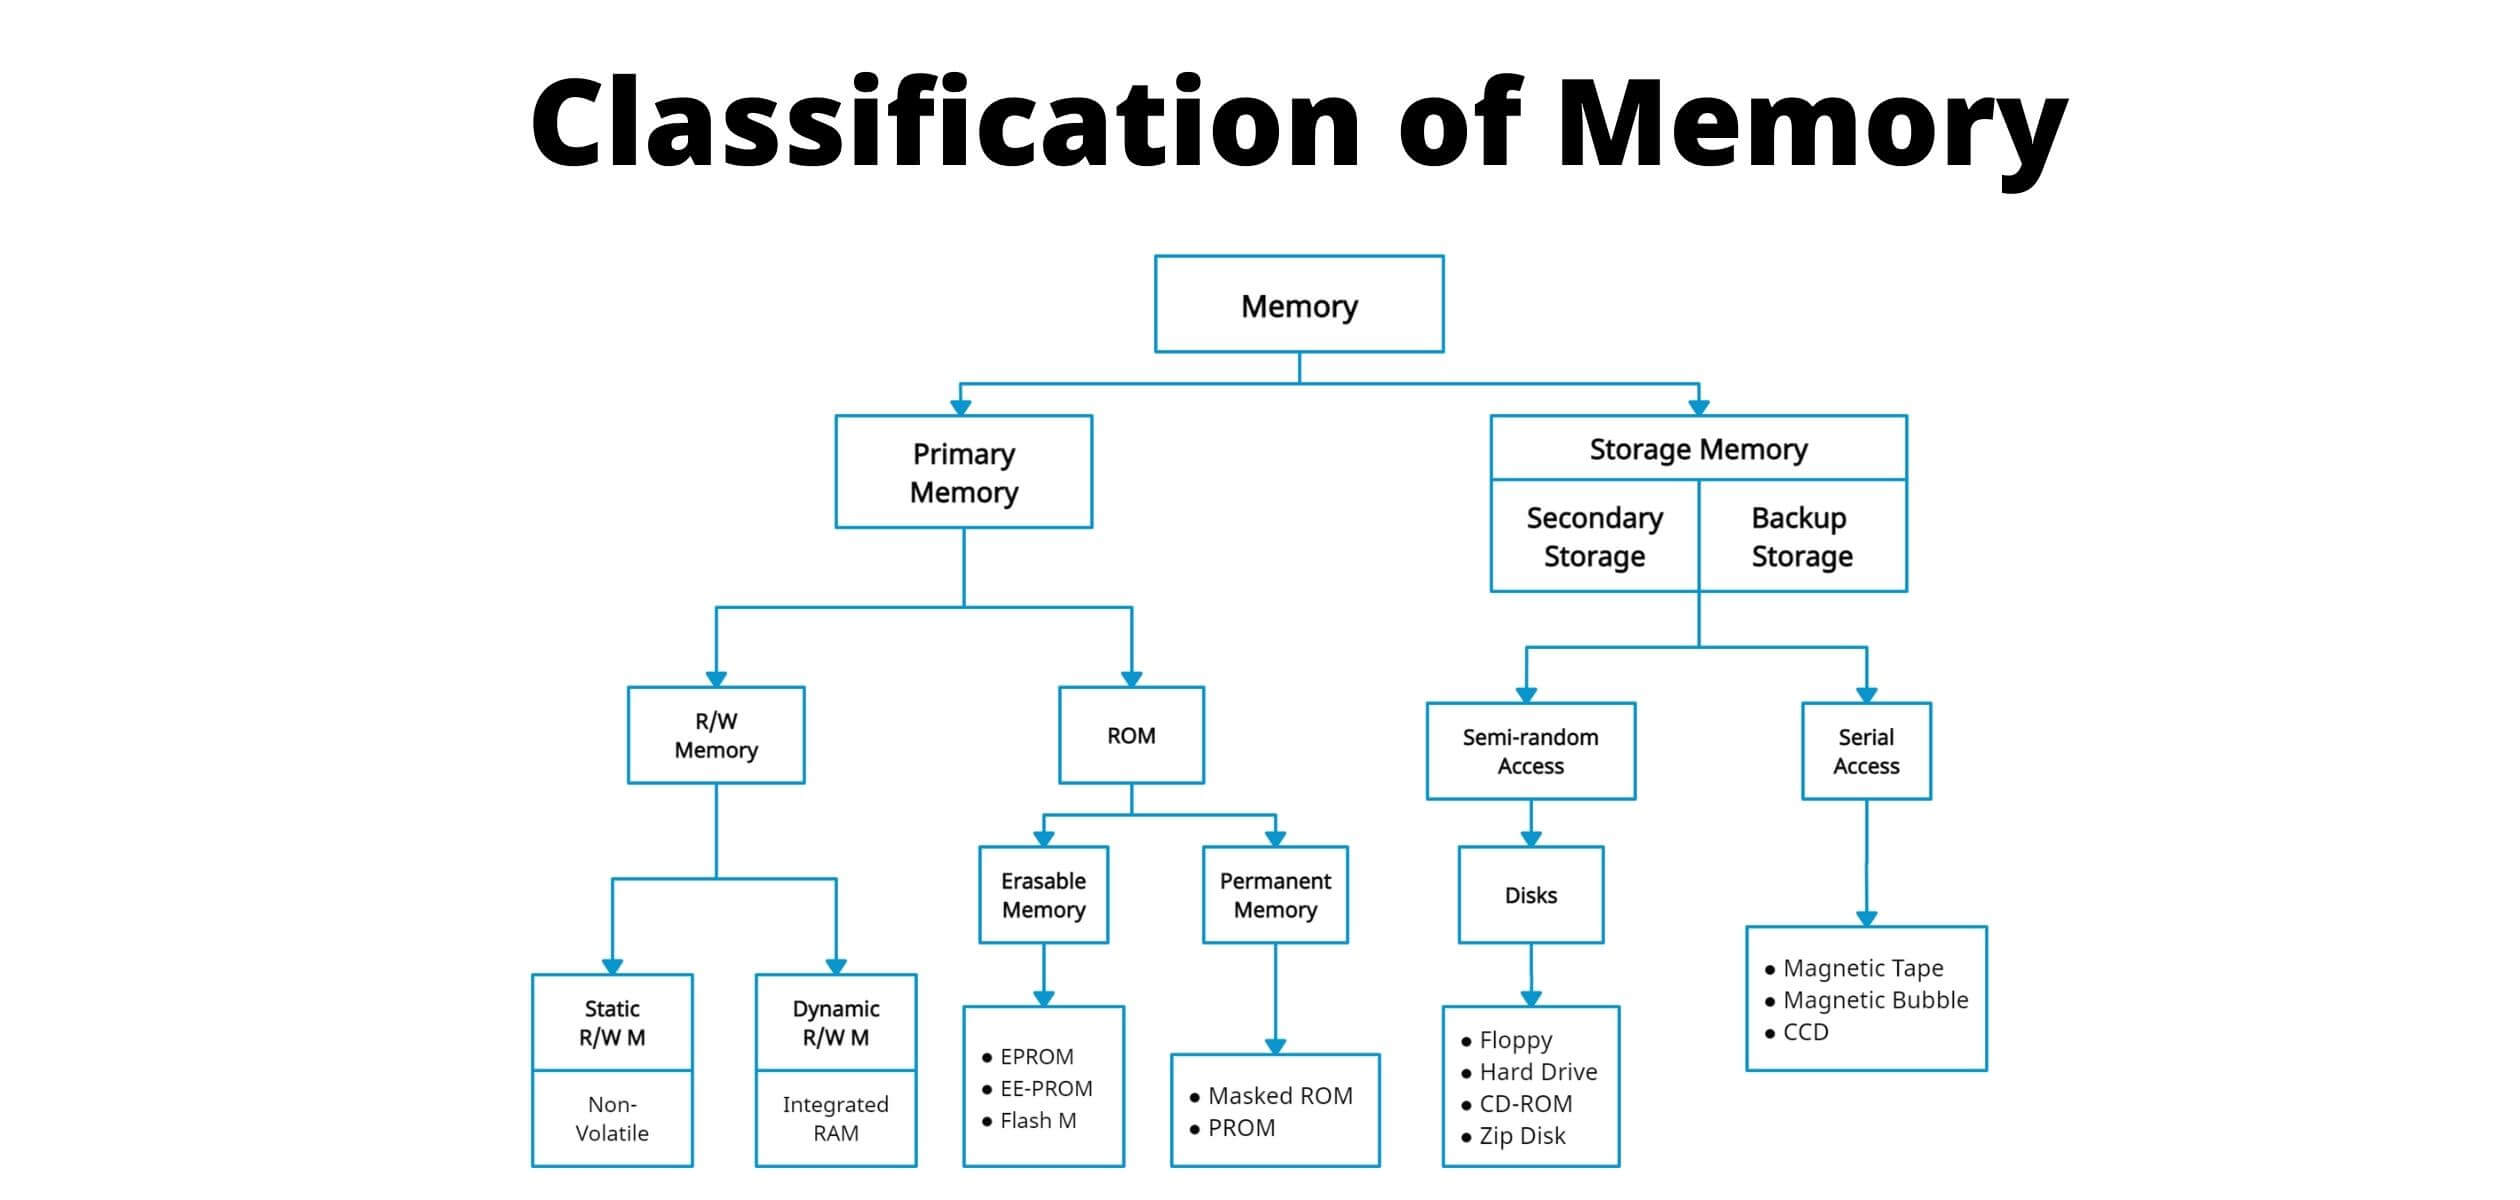 Classification of Memory Definition, Discussion, and Differences